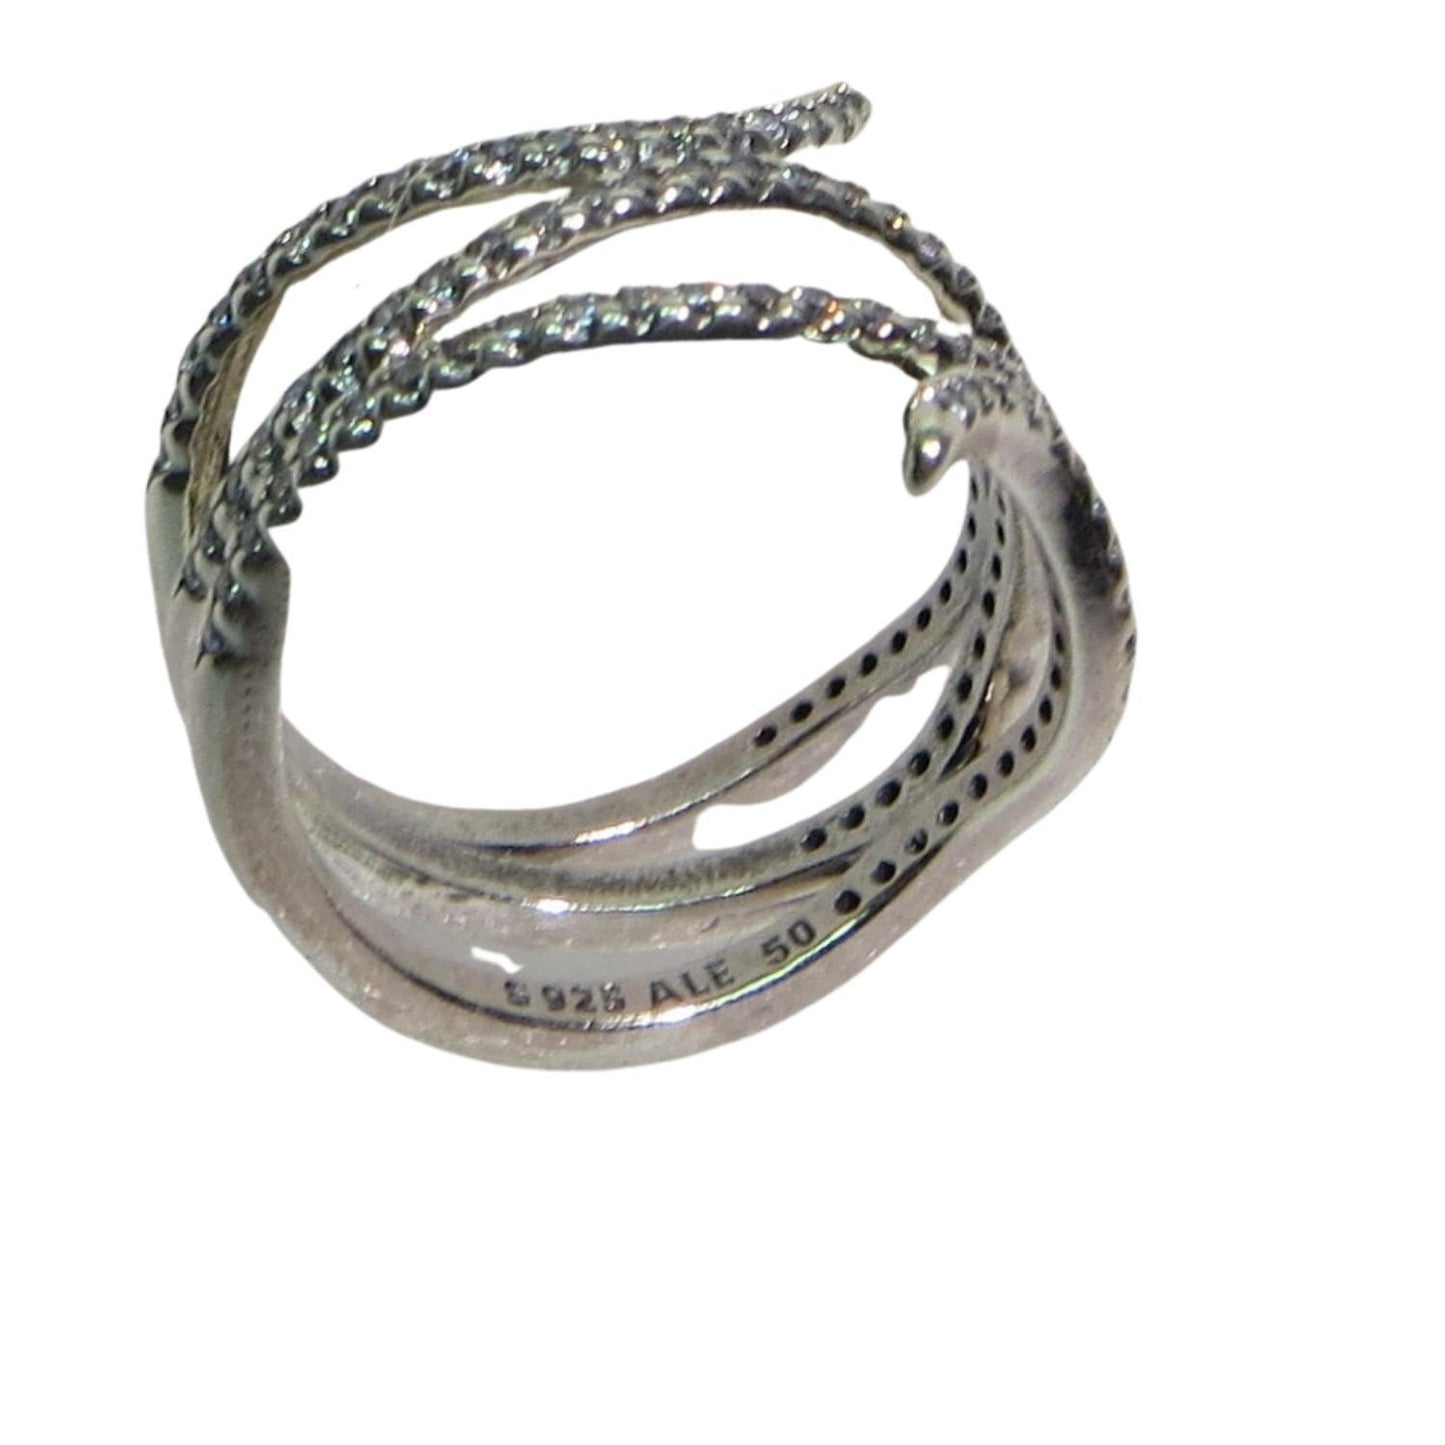 Pandora 190954CZ SWIRLING SNAKE Sterling Silver and Clear CZ Ring. Thin strands of sterling adorned with clear CZs forms a snake design.